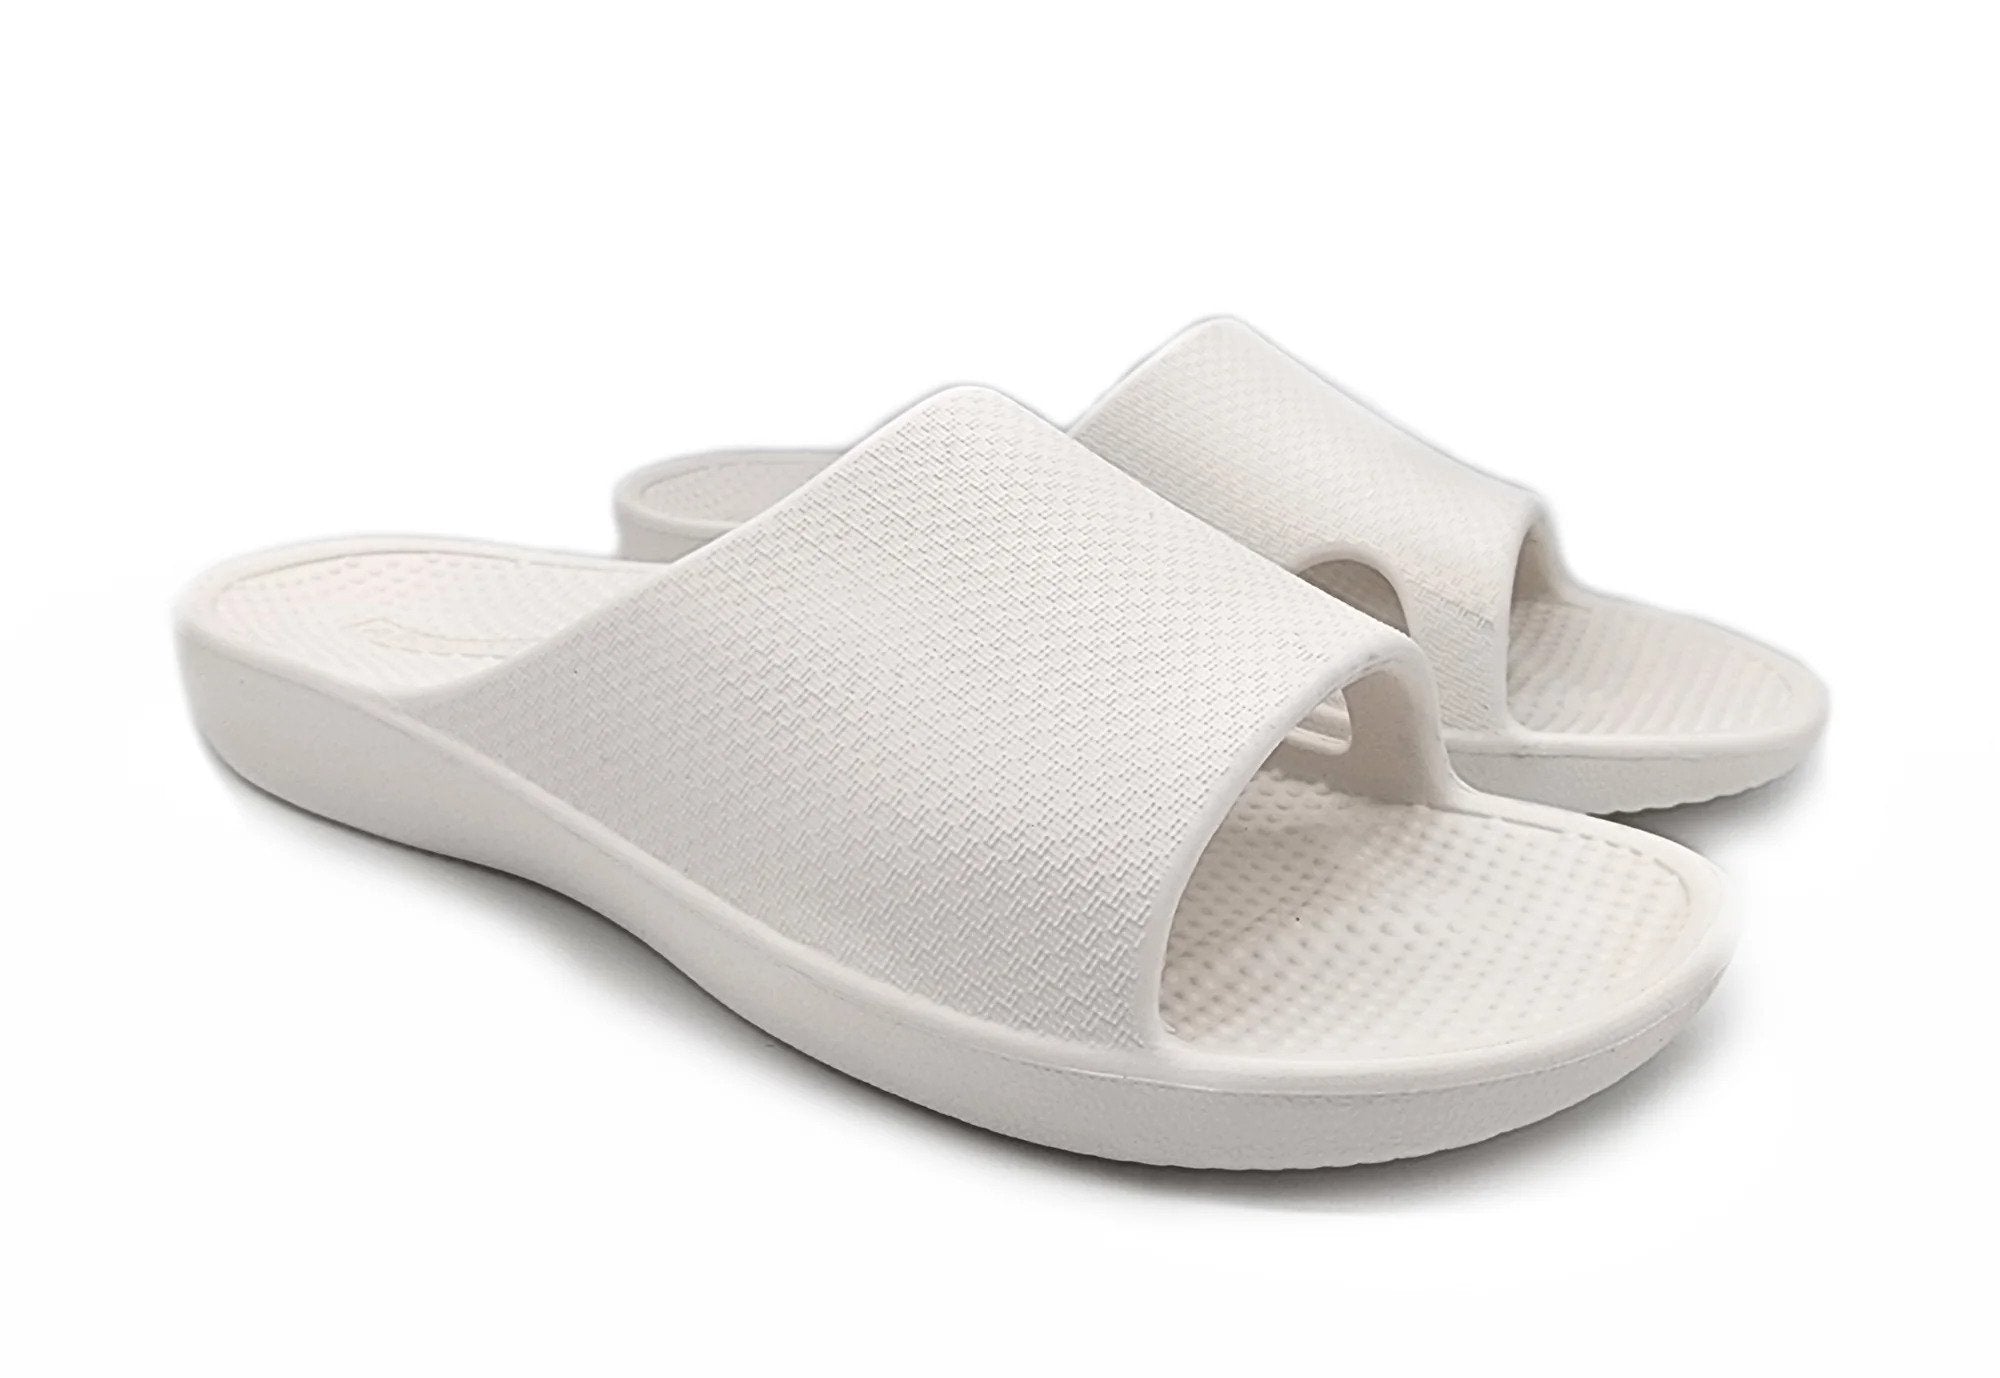 Archline Rebound Arch Support Slides White, Stylish Comfort for Your Feet  - Foot HQ Podiatry